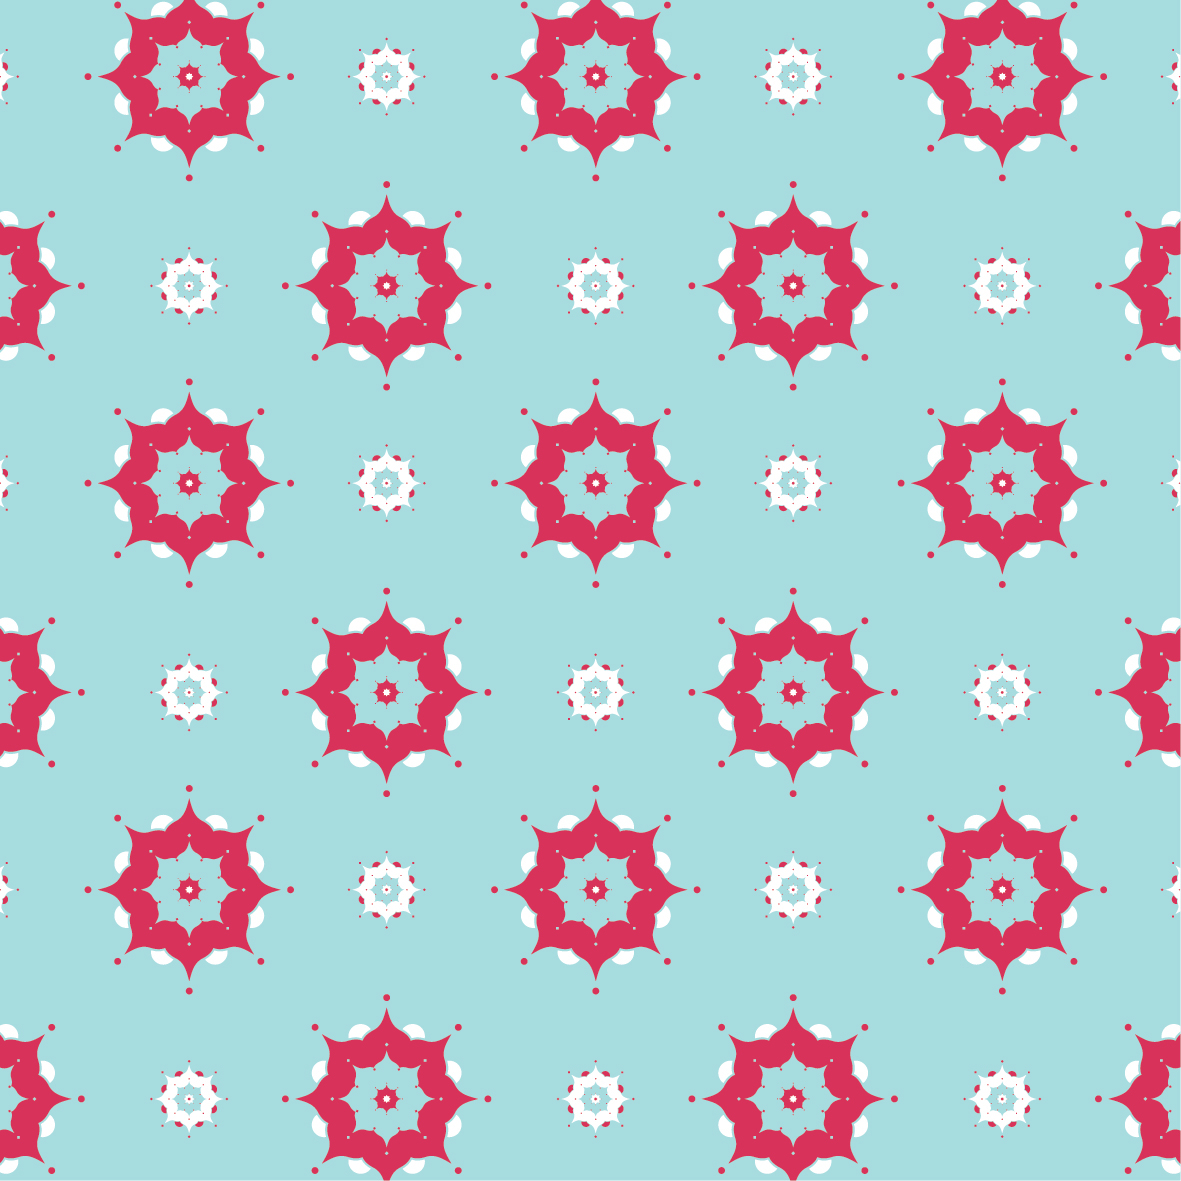 patterndesign pattern design floral Flowers graphicdesign wallpaper fabric textile